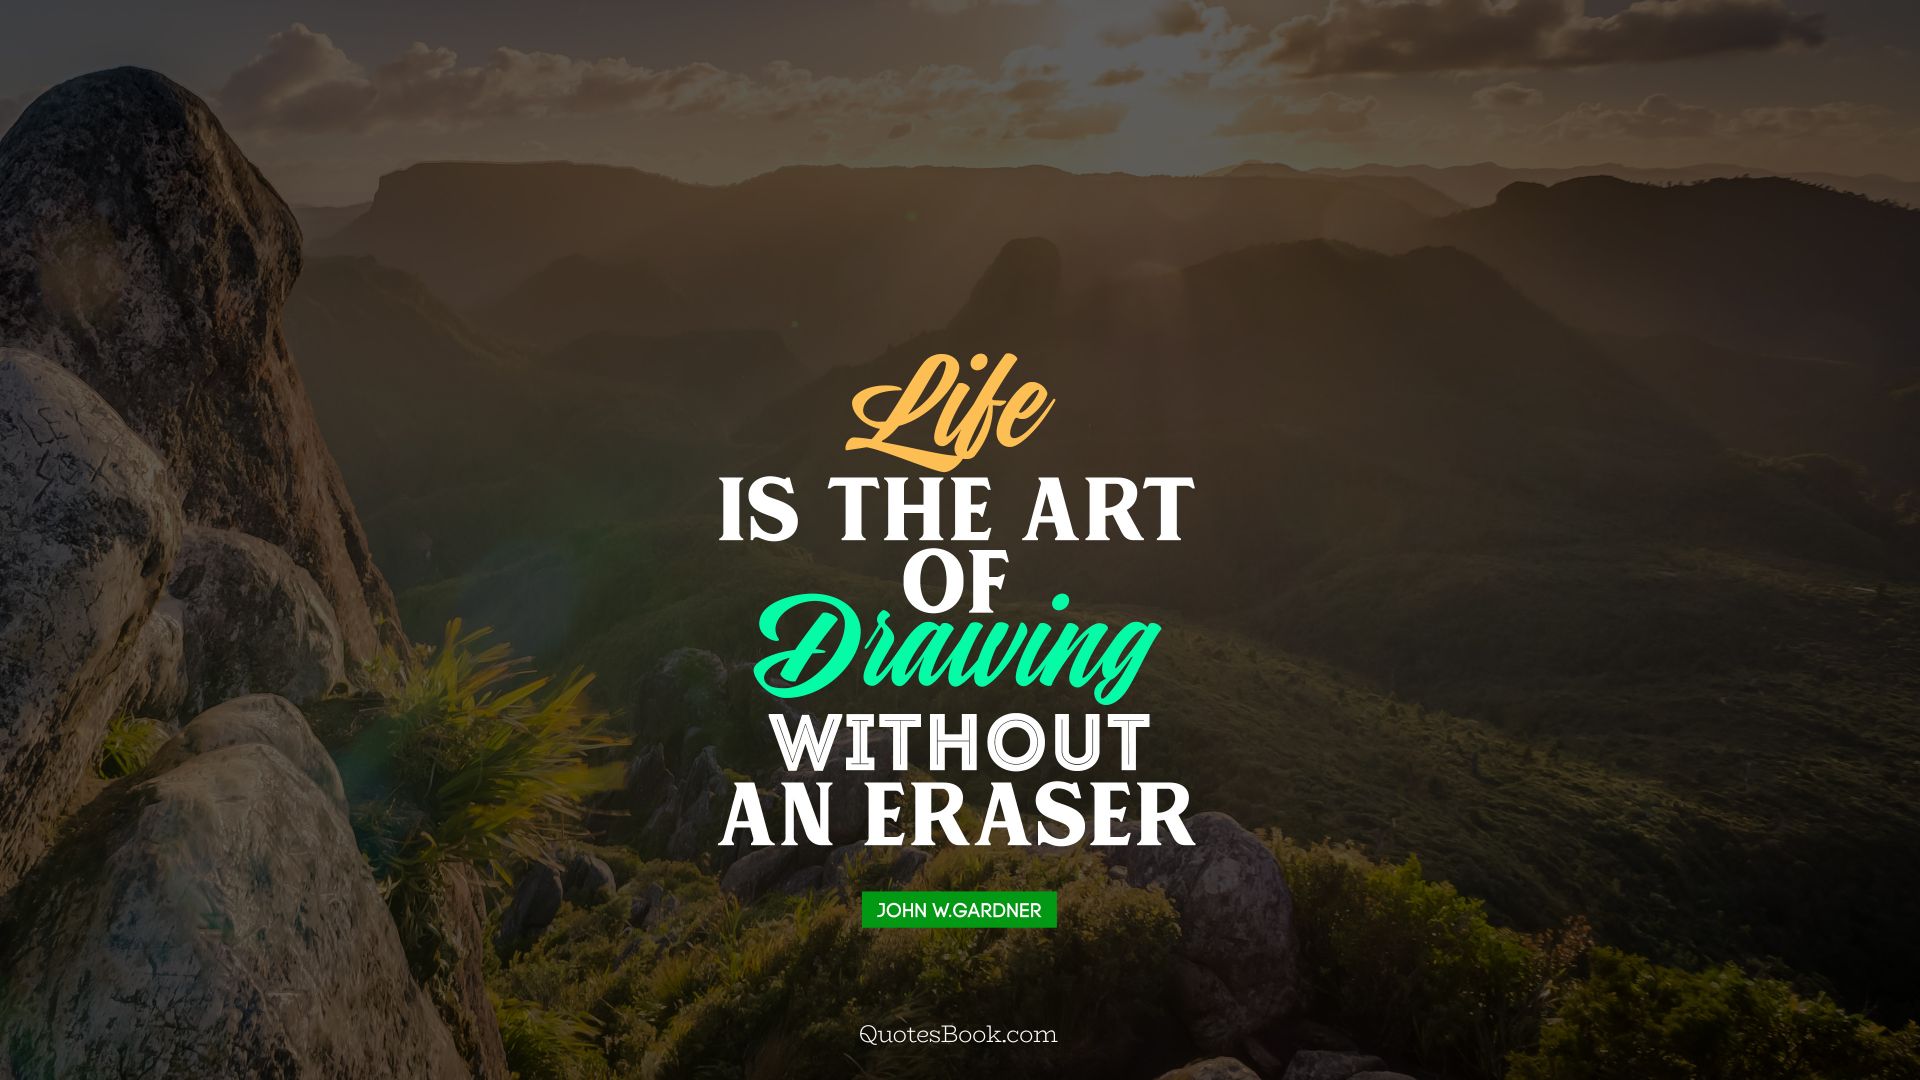 Life is the art of drawing without an eraser. - Quote by John W.Gardner